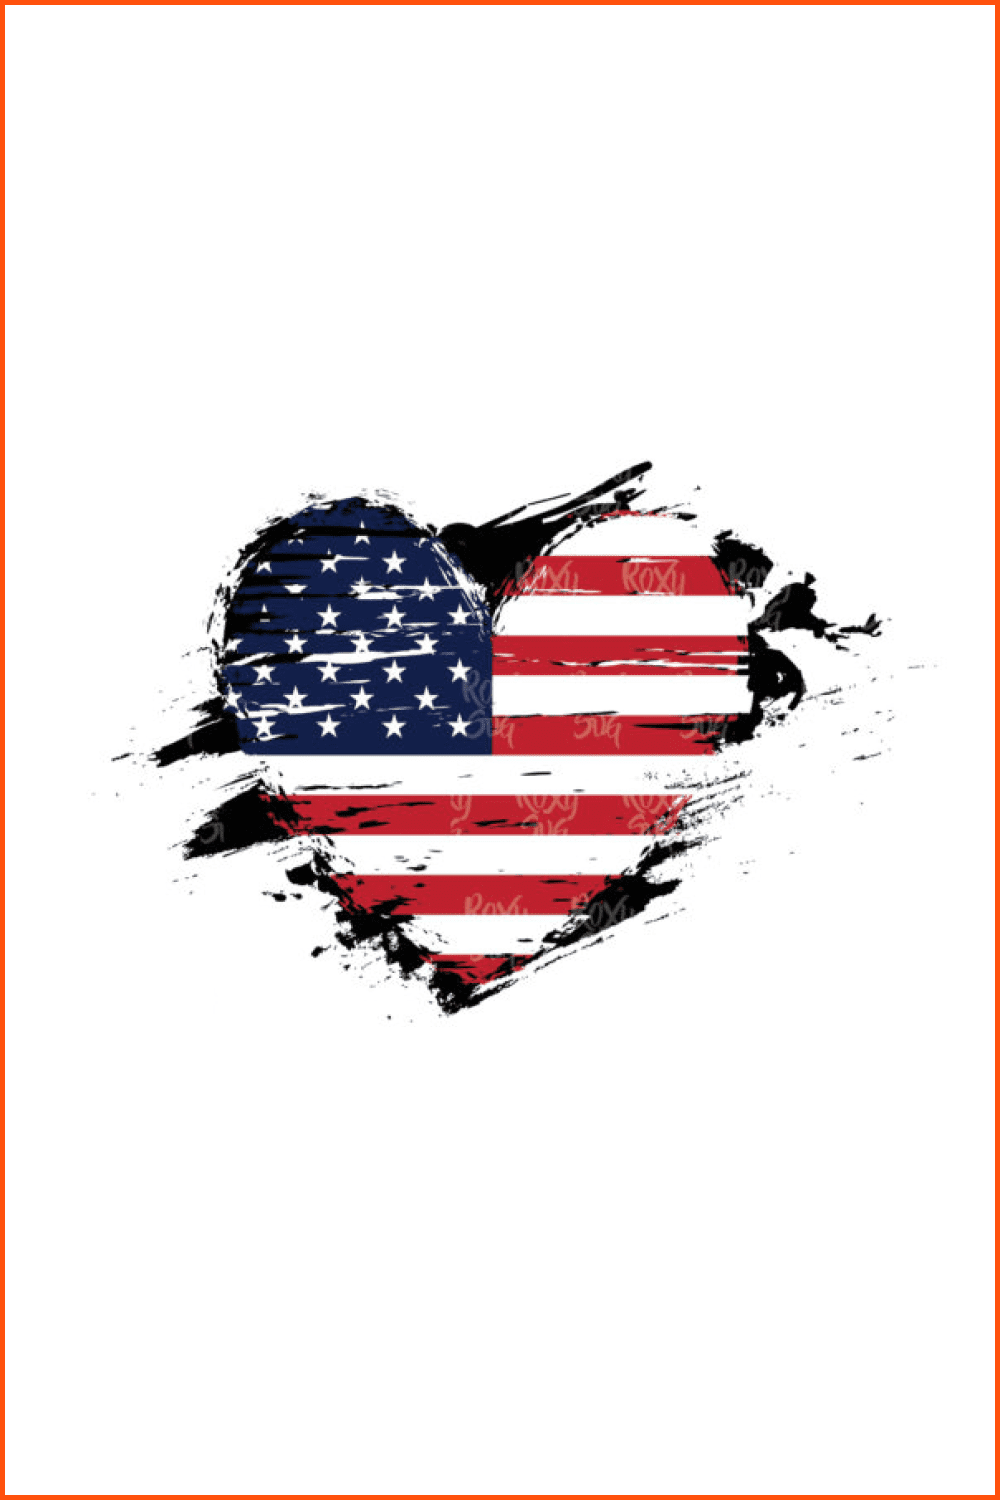 Distressed American Flag in a Heart Shape.